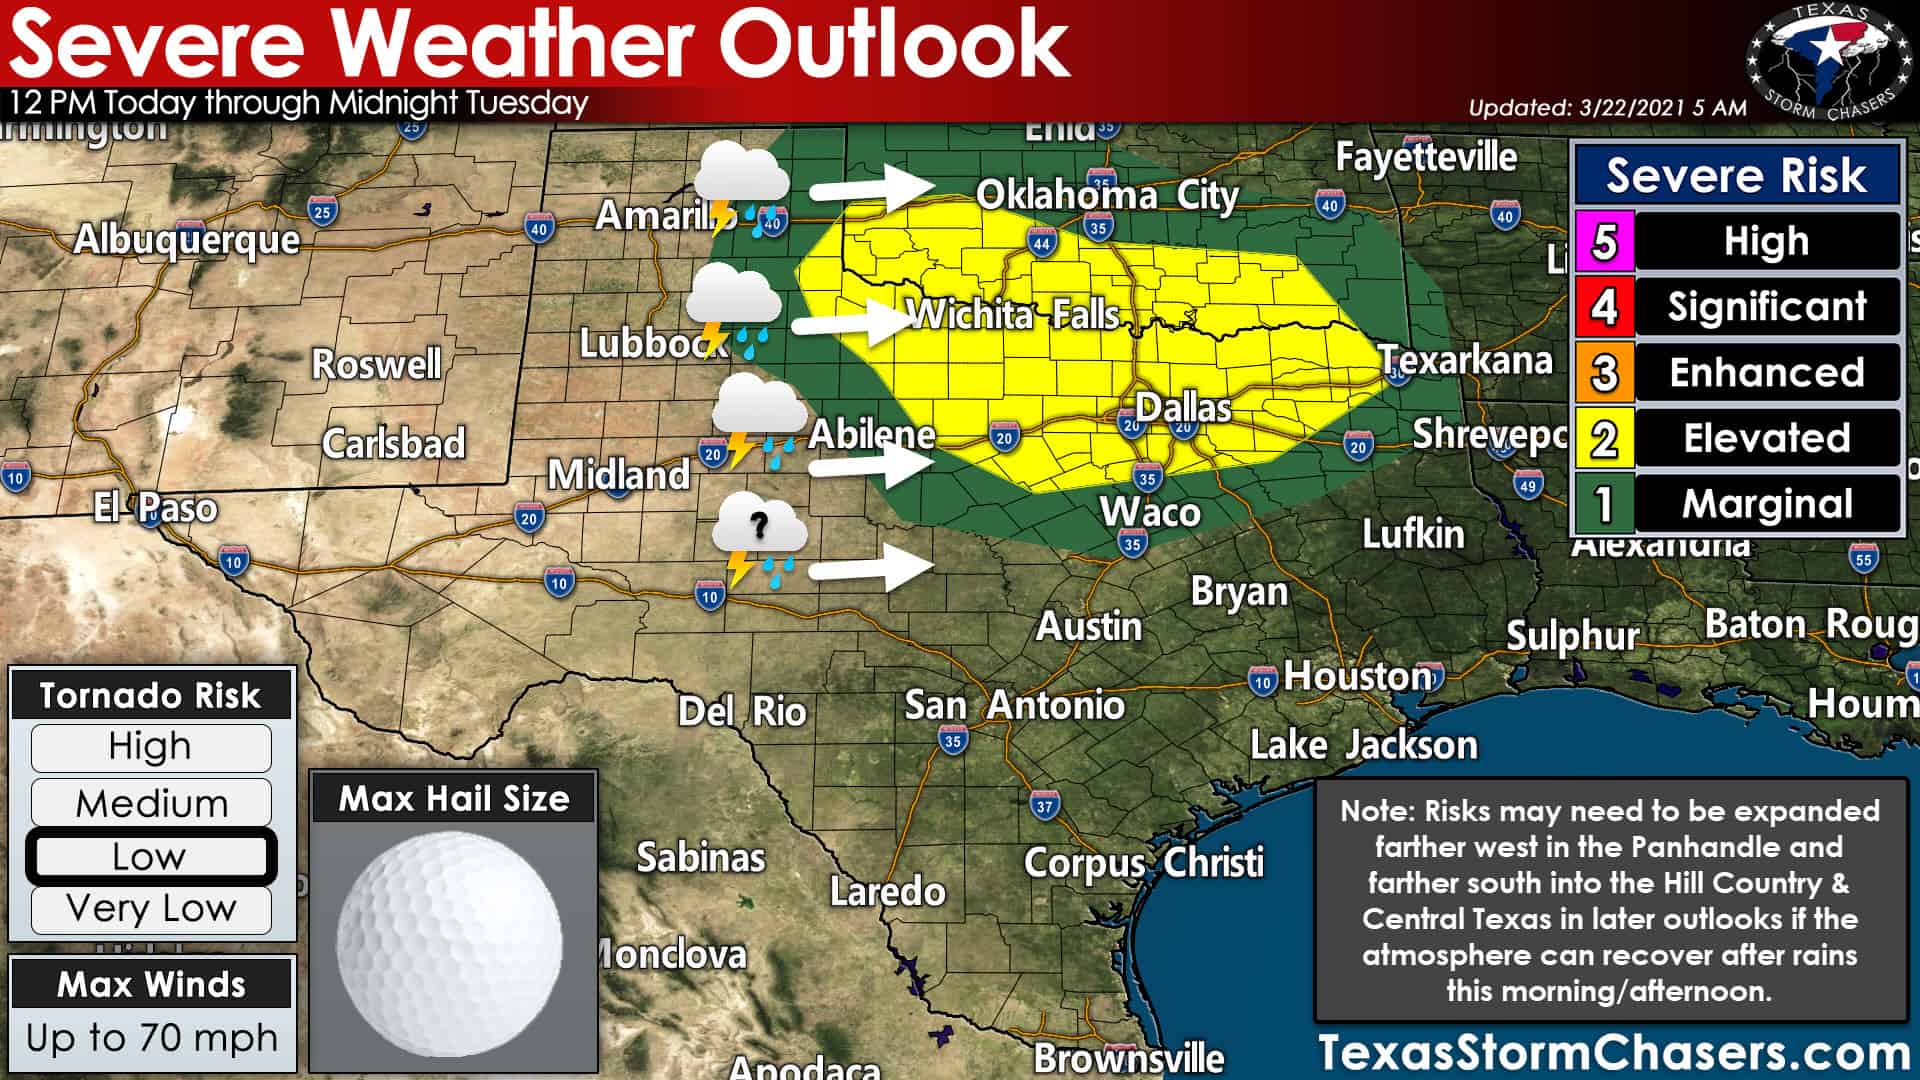 Severe storms possible this afternoon & evening across Northern Texas